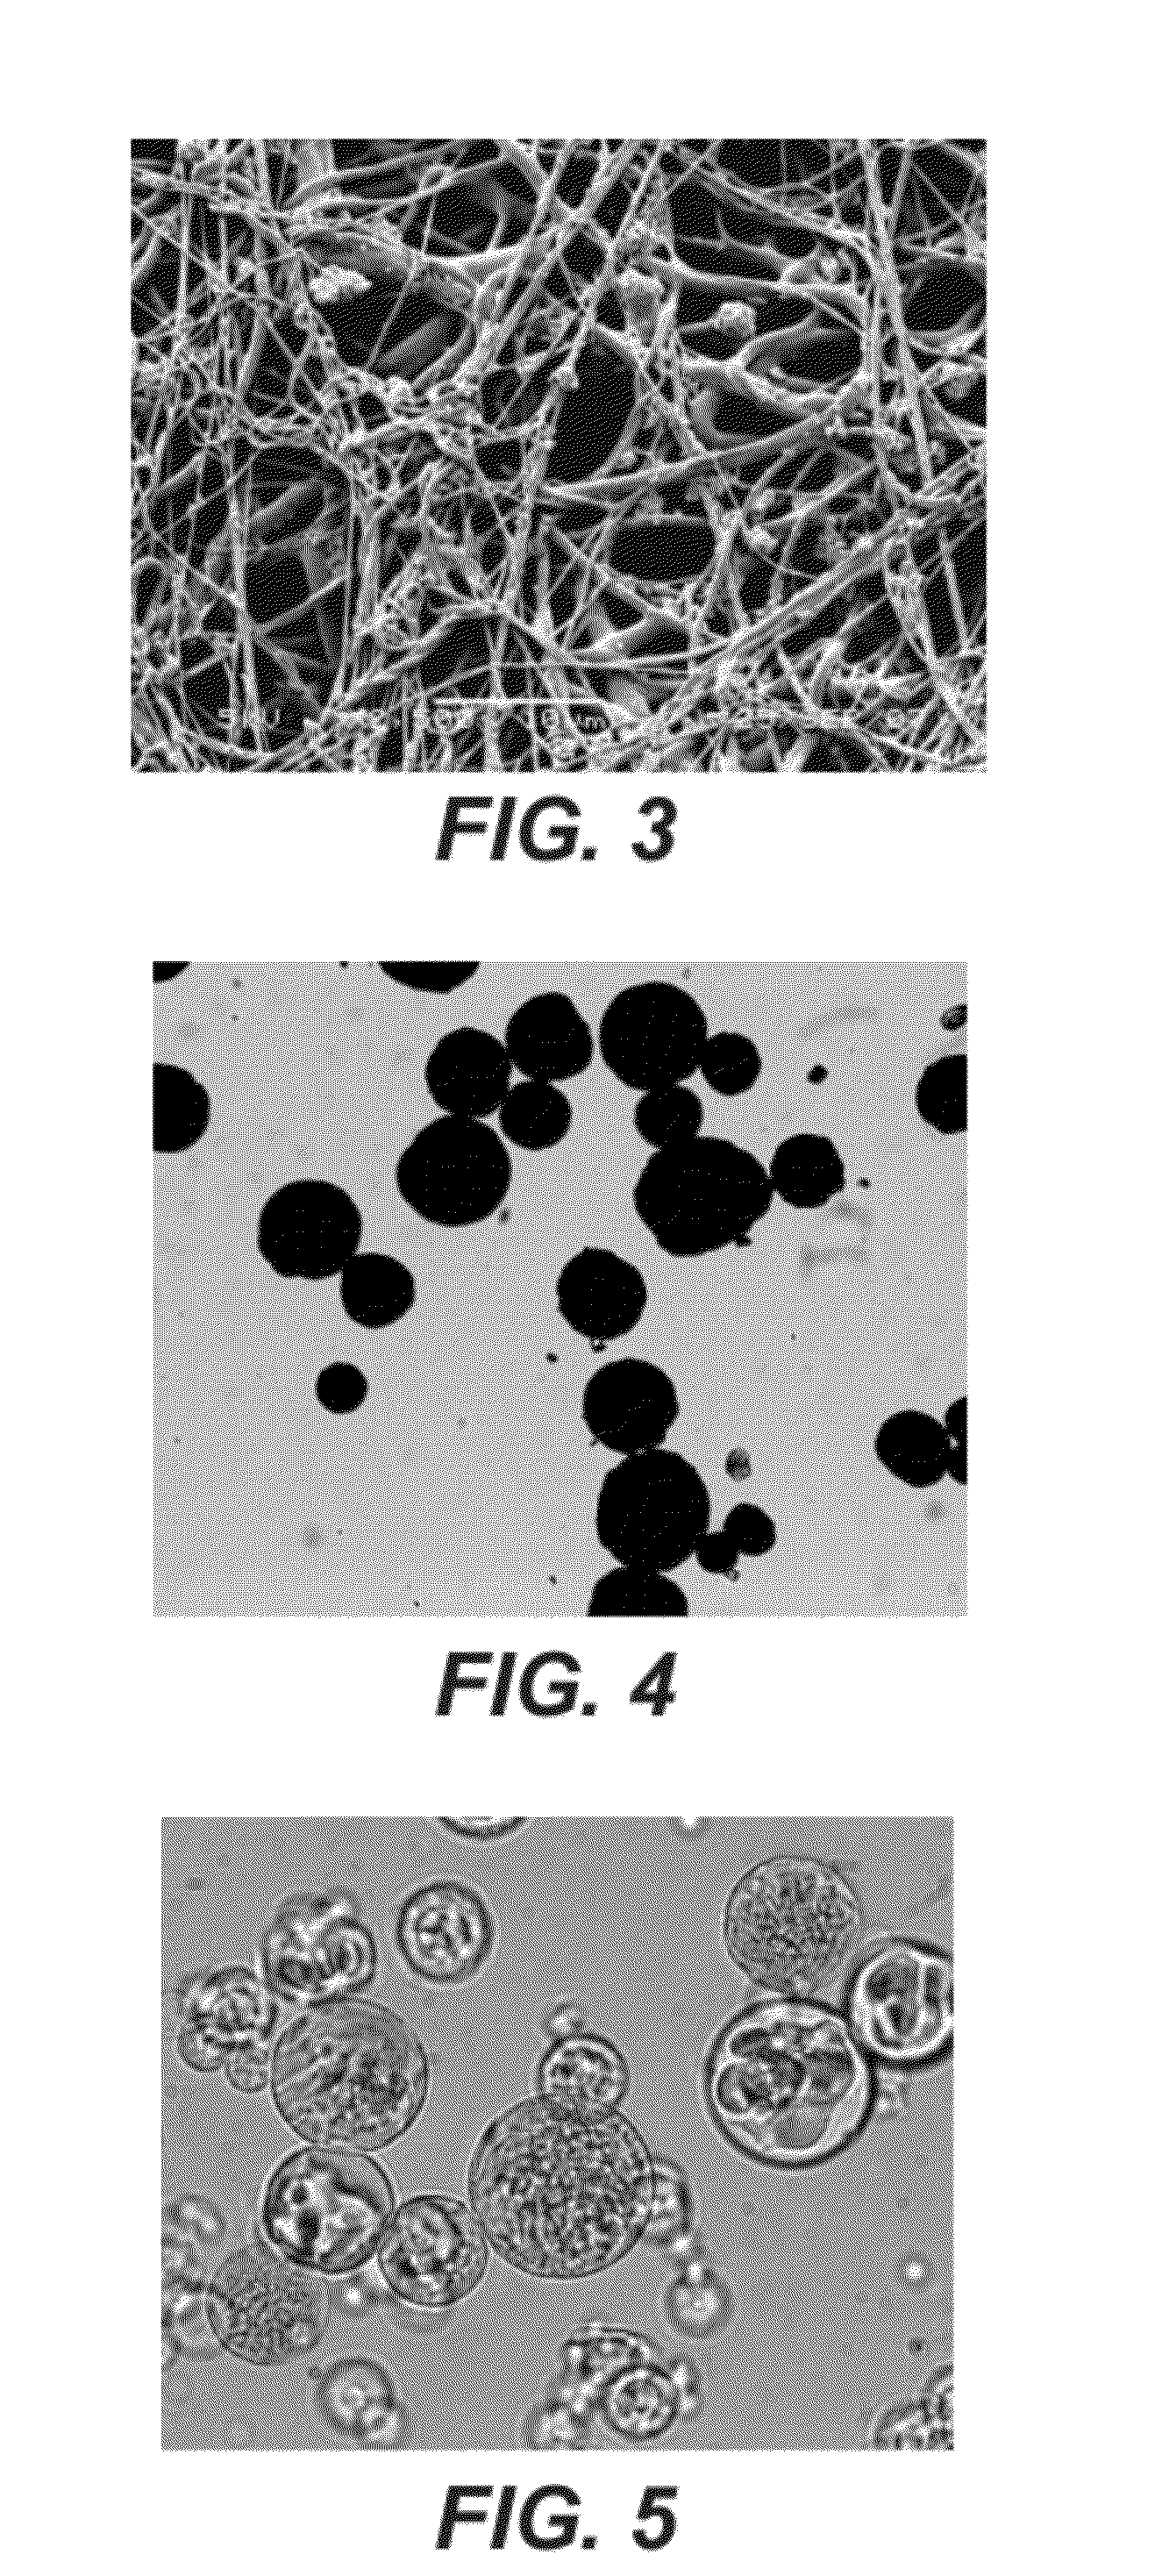 Degradable removable implant for the sustained release of an active compound